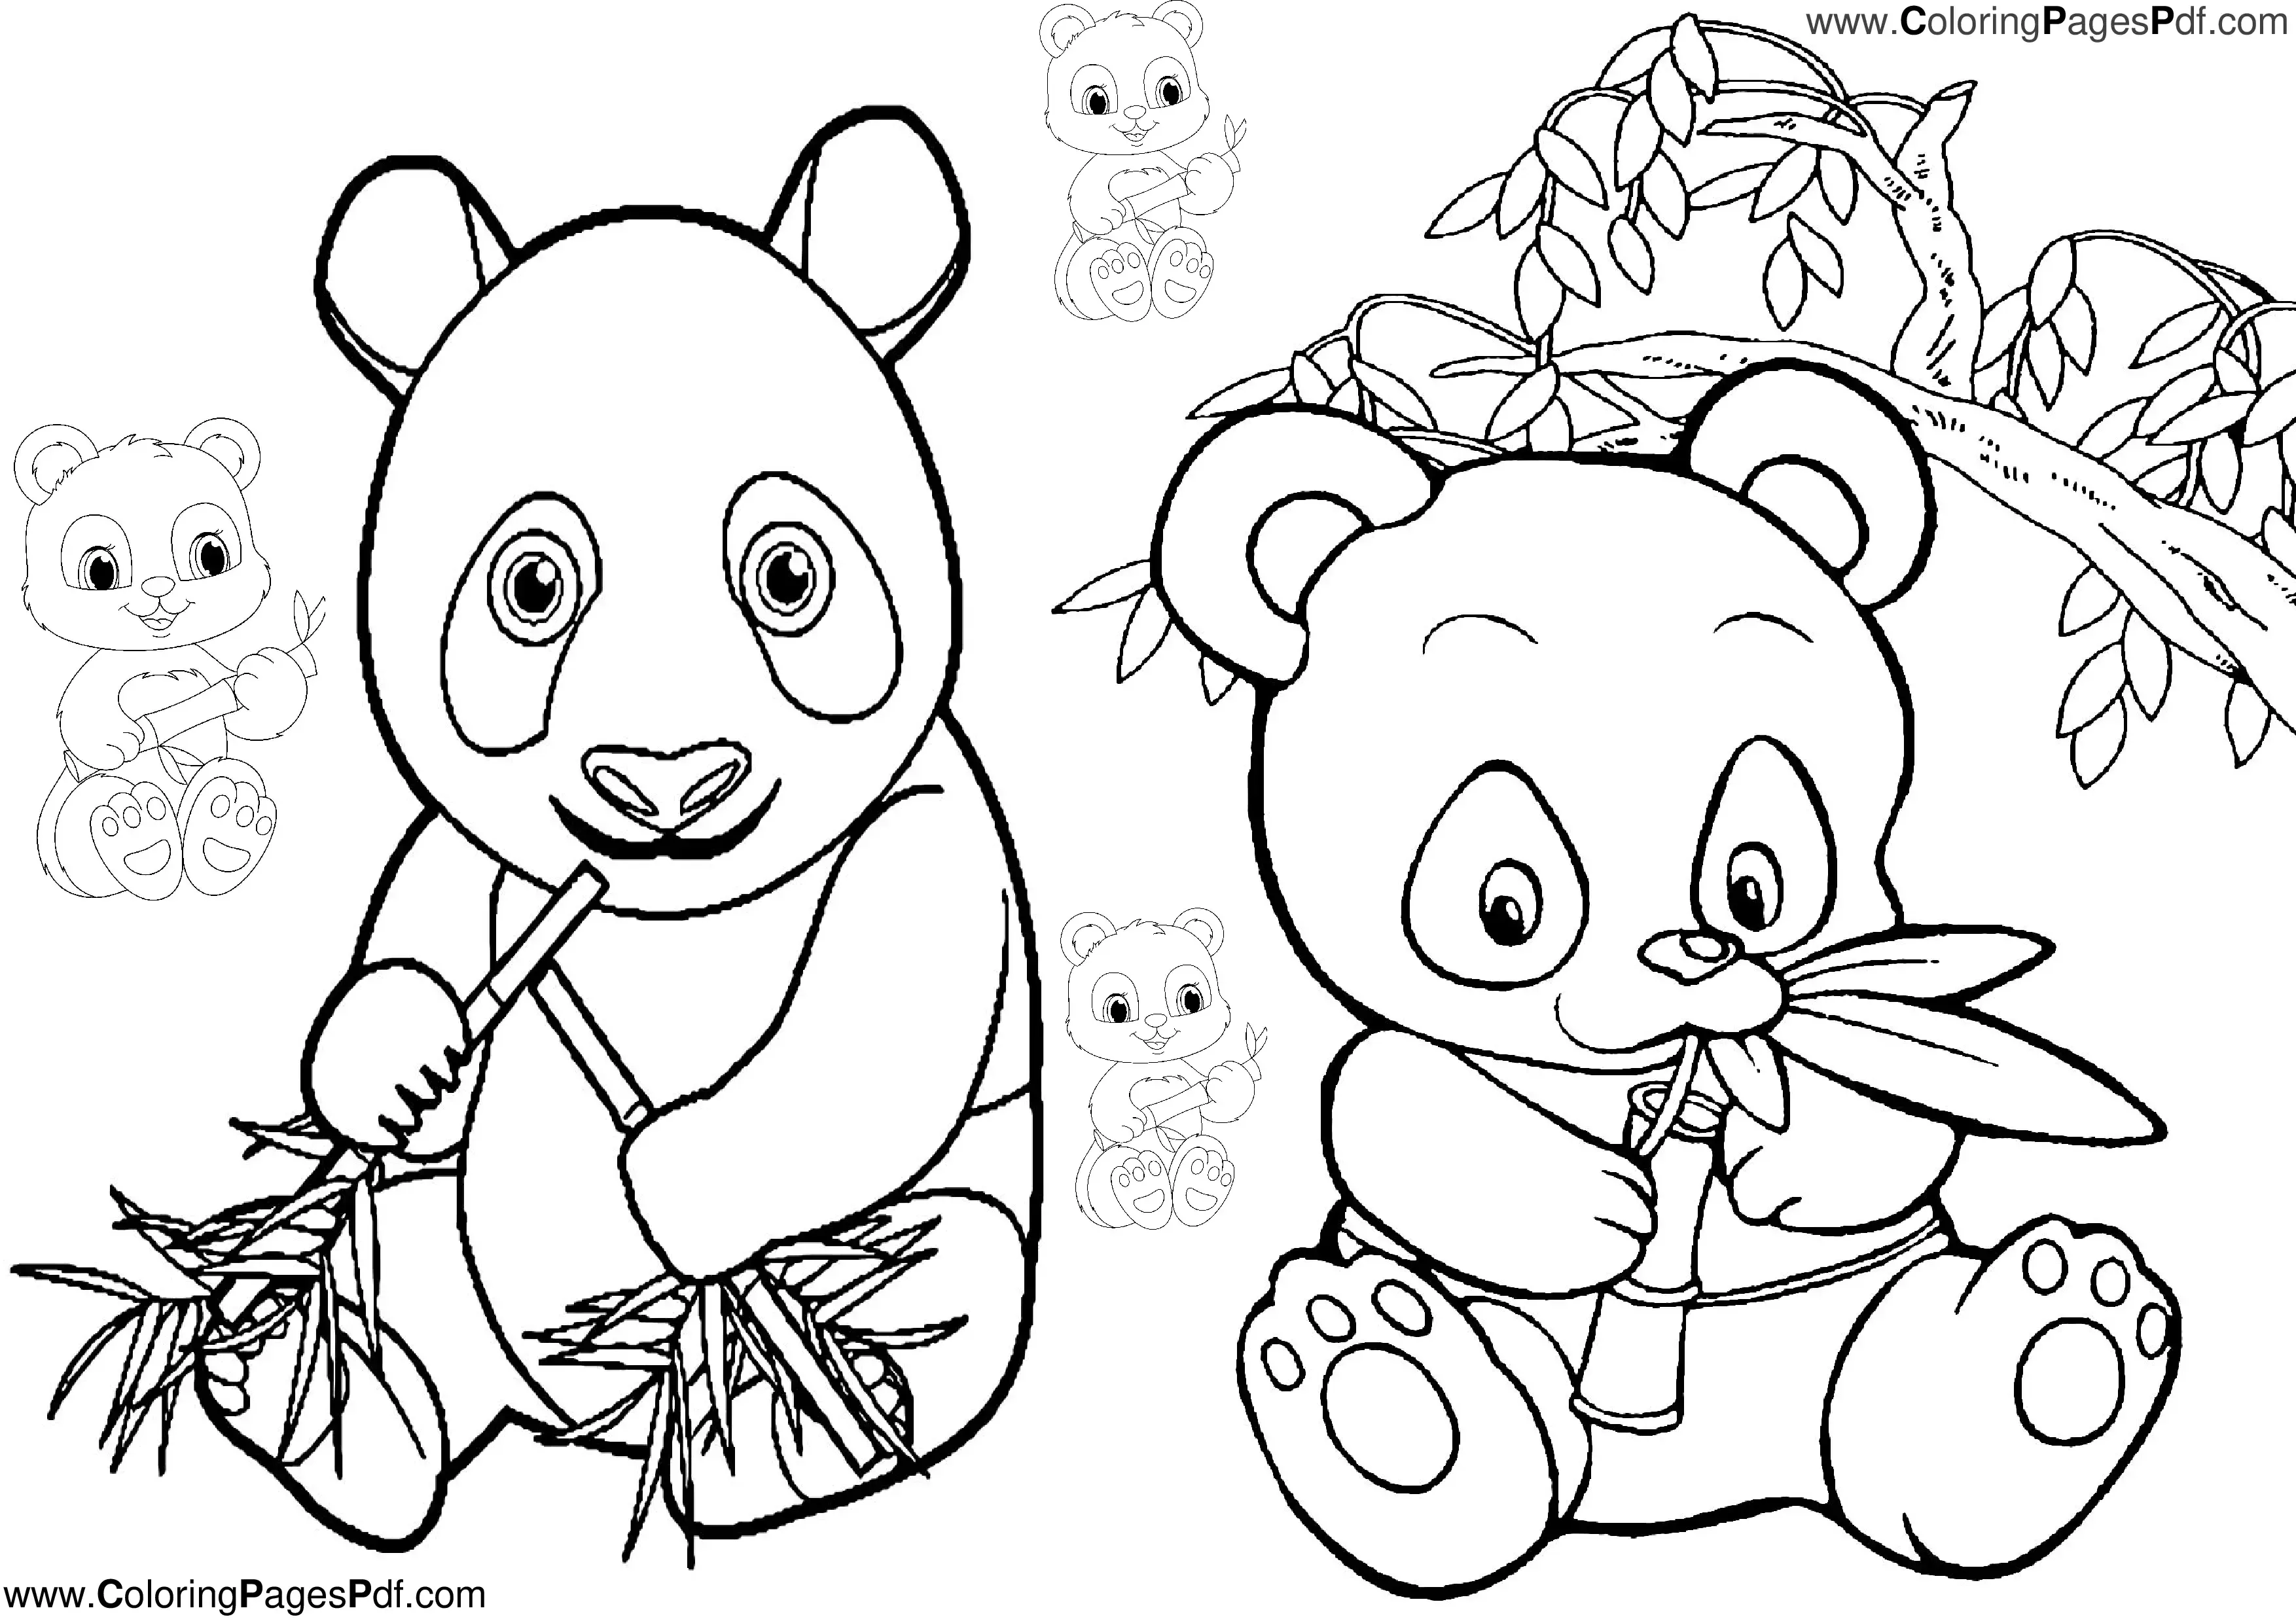 Baby panda coloring pages